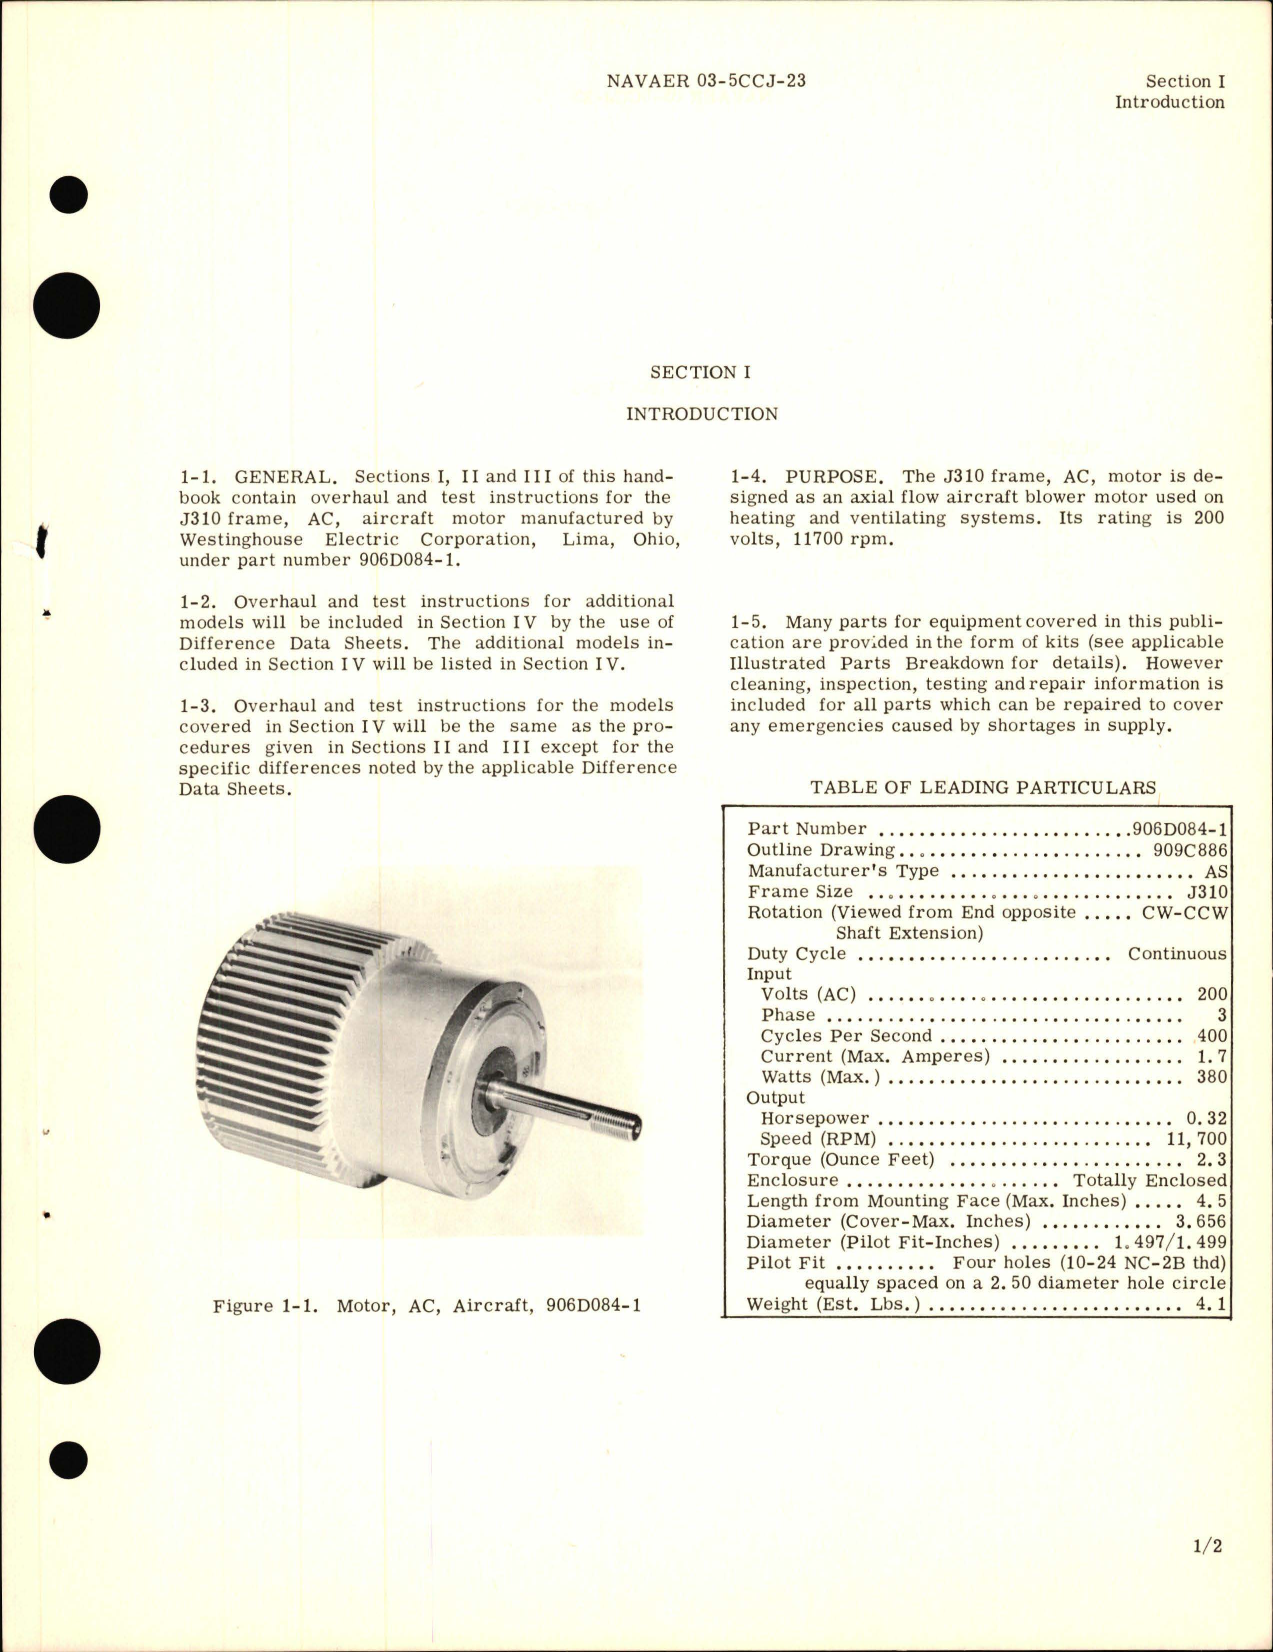 Sample page 5 from AirCorps Library document: Overhaul Instructions for AC Motor - Part 906D084-1 